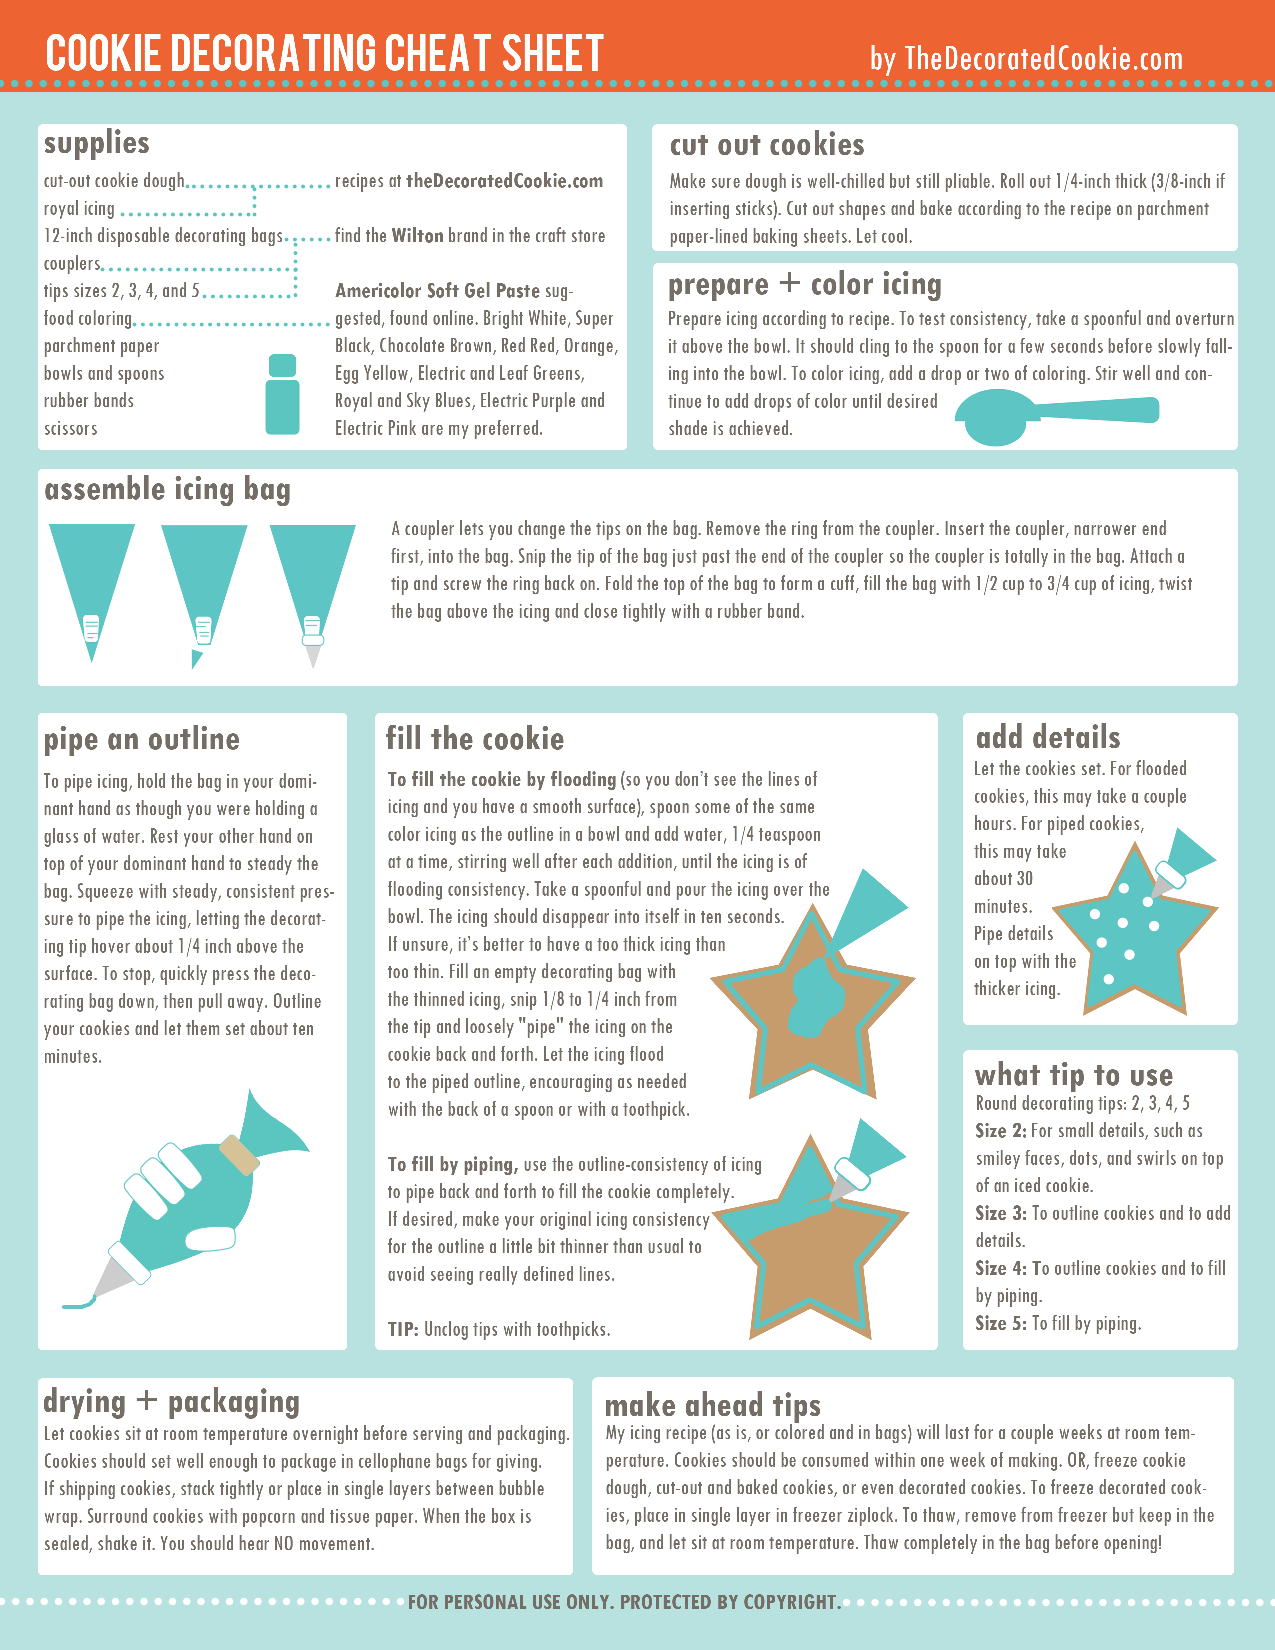 cookie decorating cheat sheet for beginners 